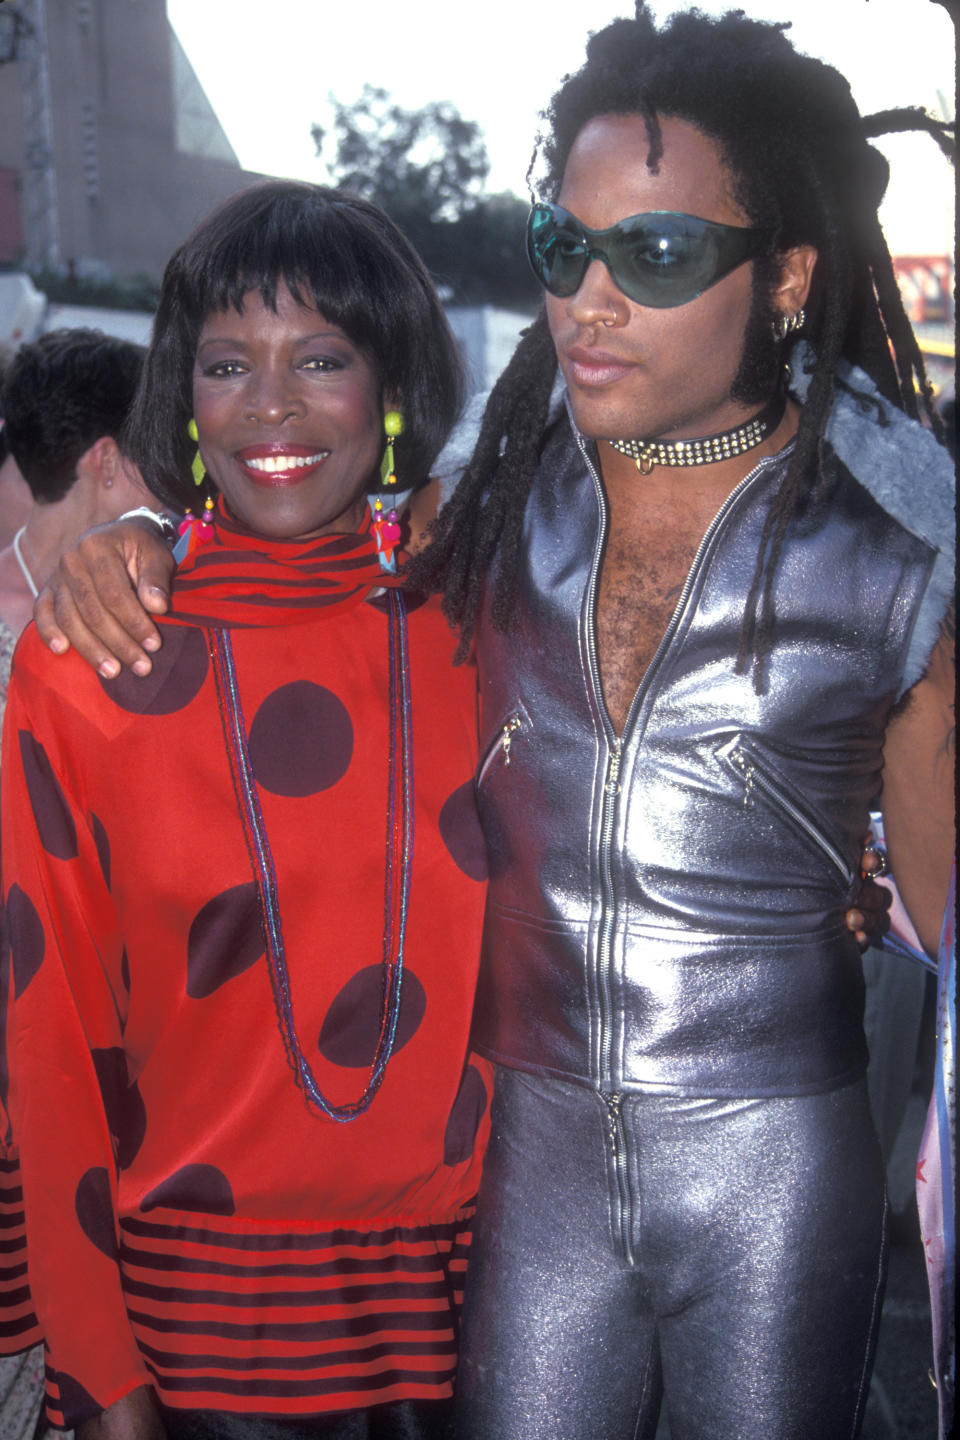 Lenny Kravitz with his arm around Roxie Roker's shoulder